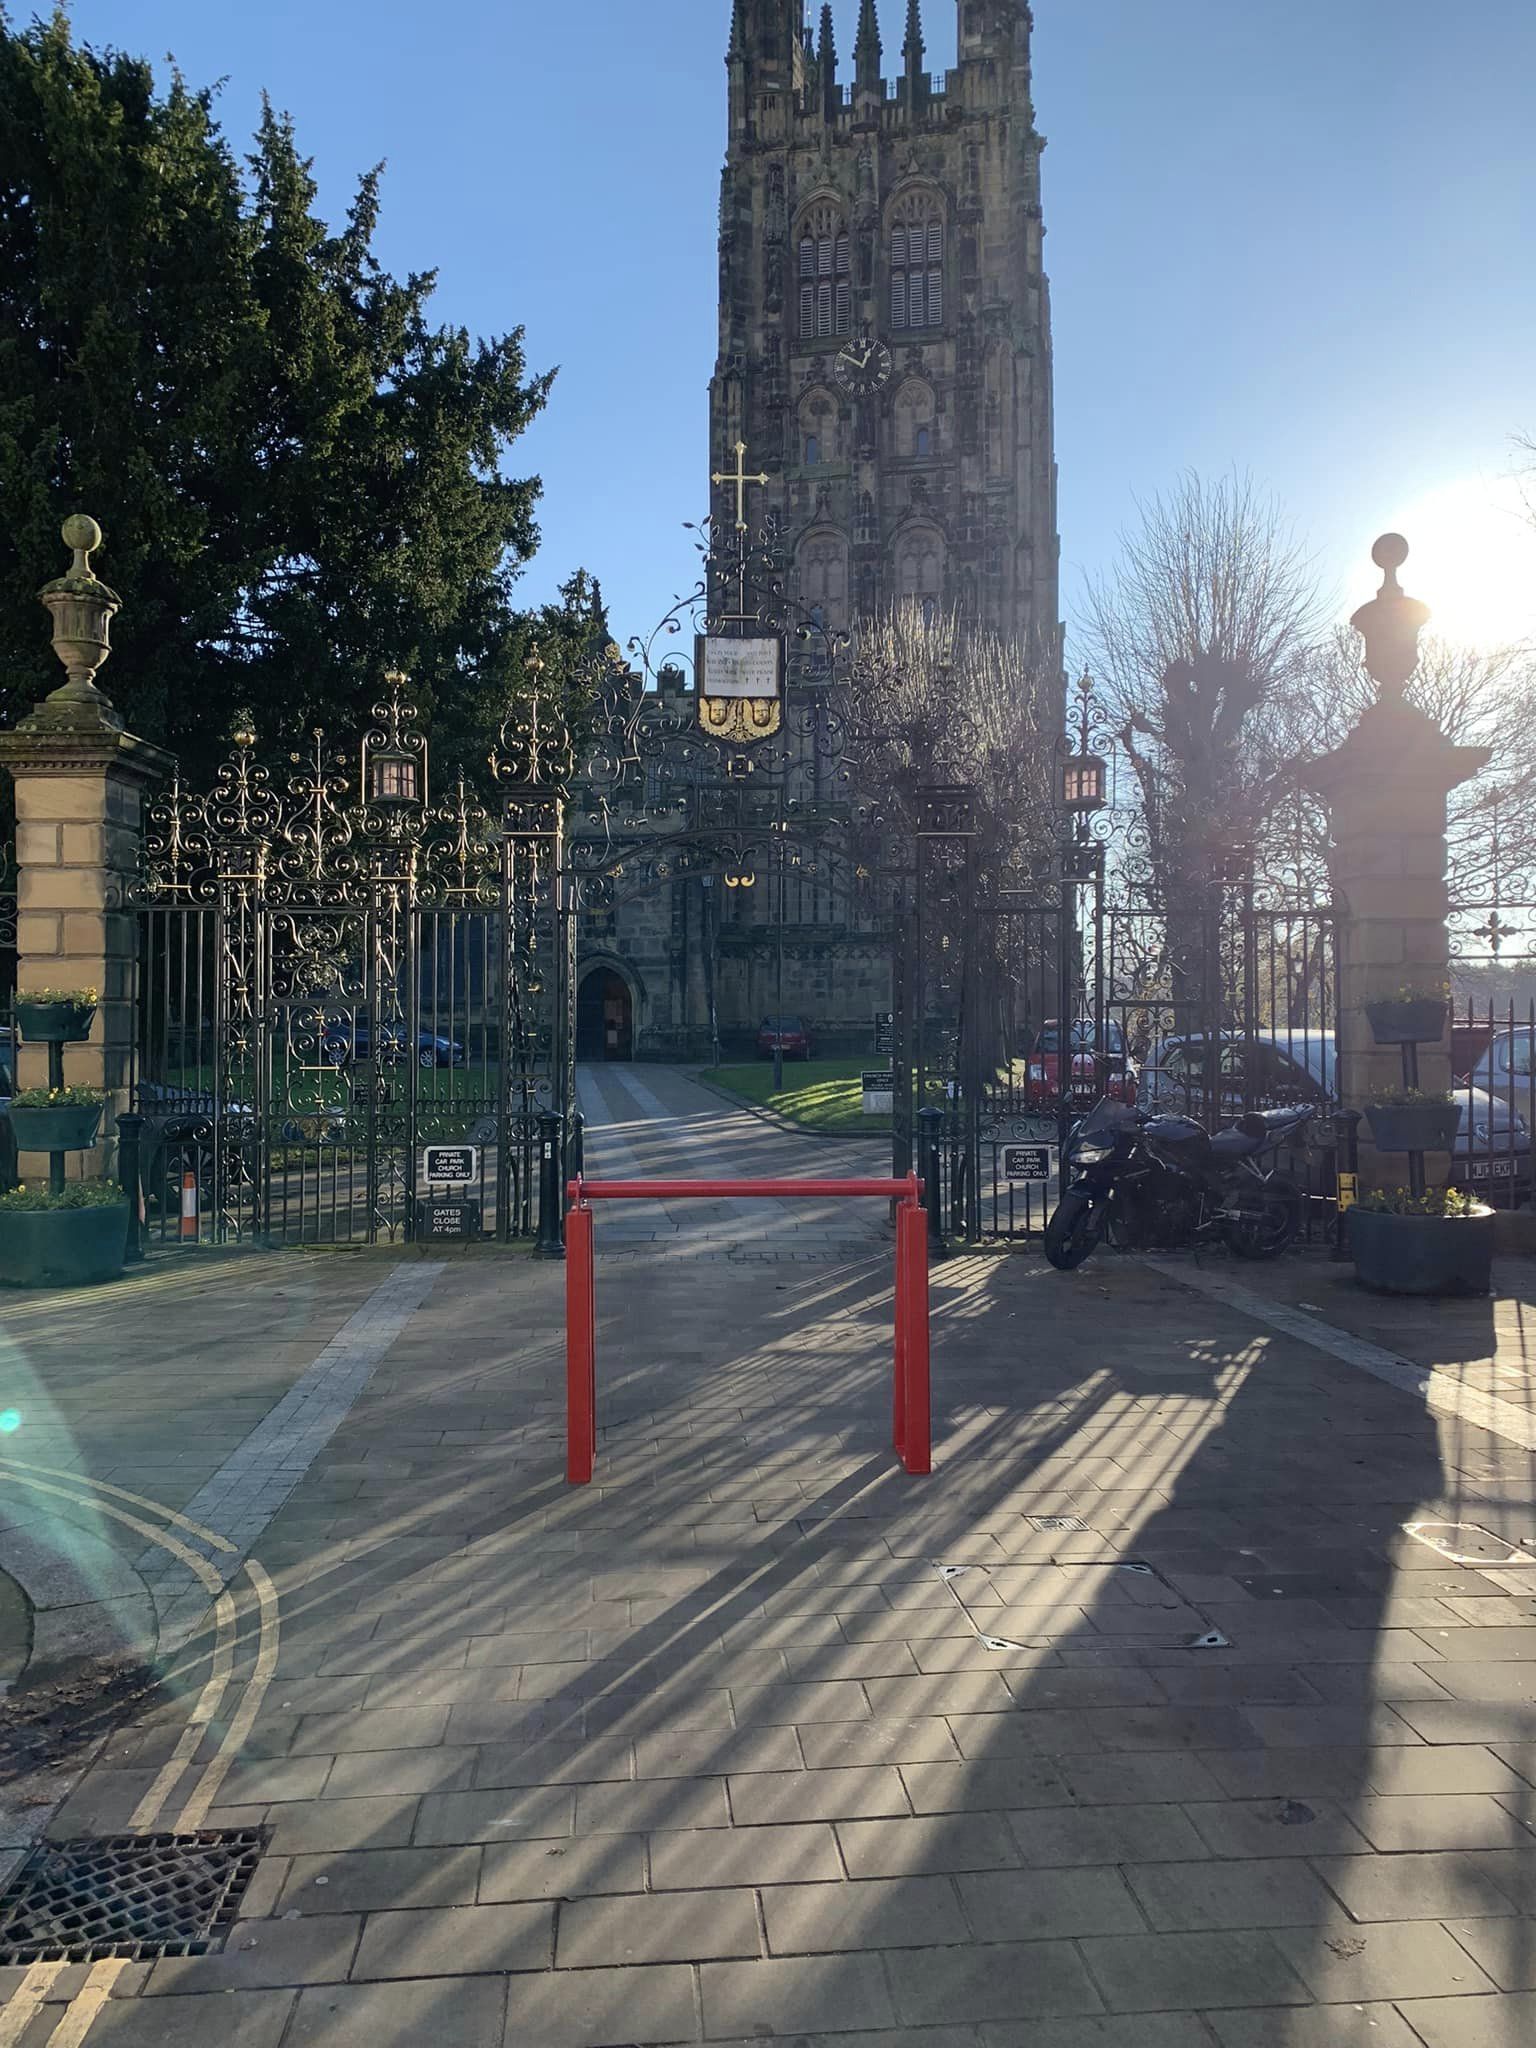 The last Kop barrier at St Giles Parish Church, on tour in Wrexham.